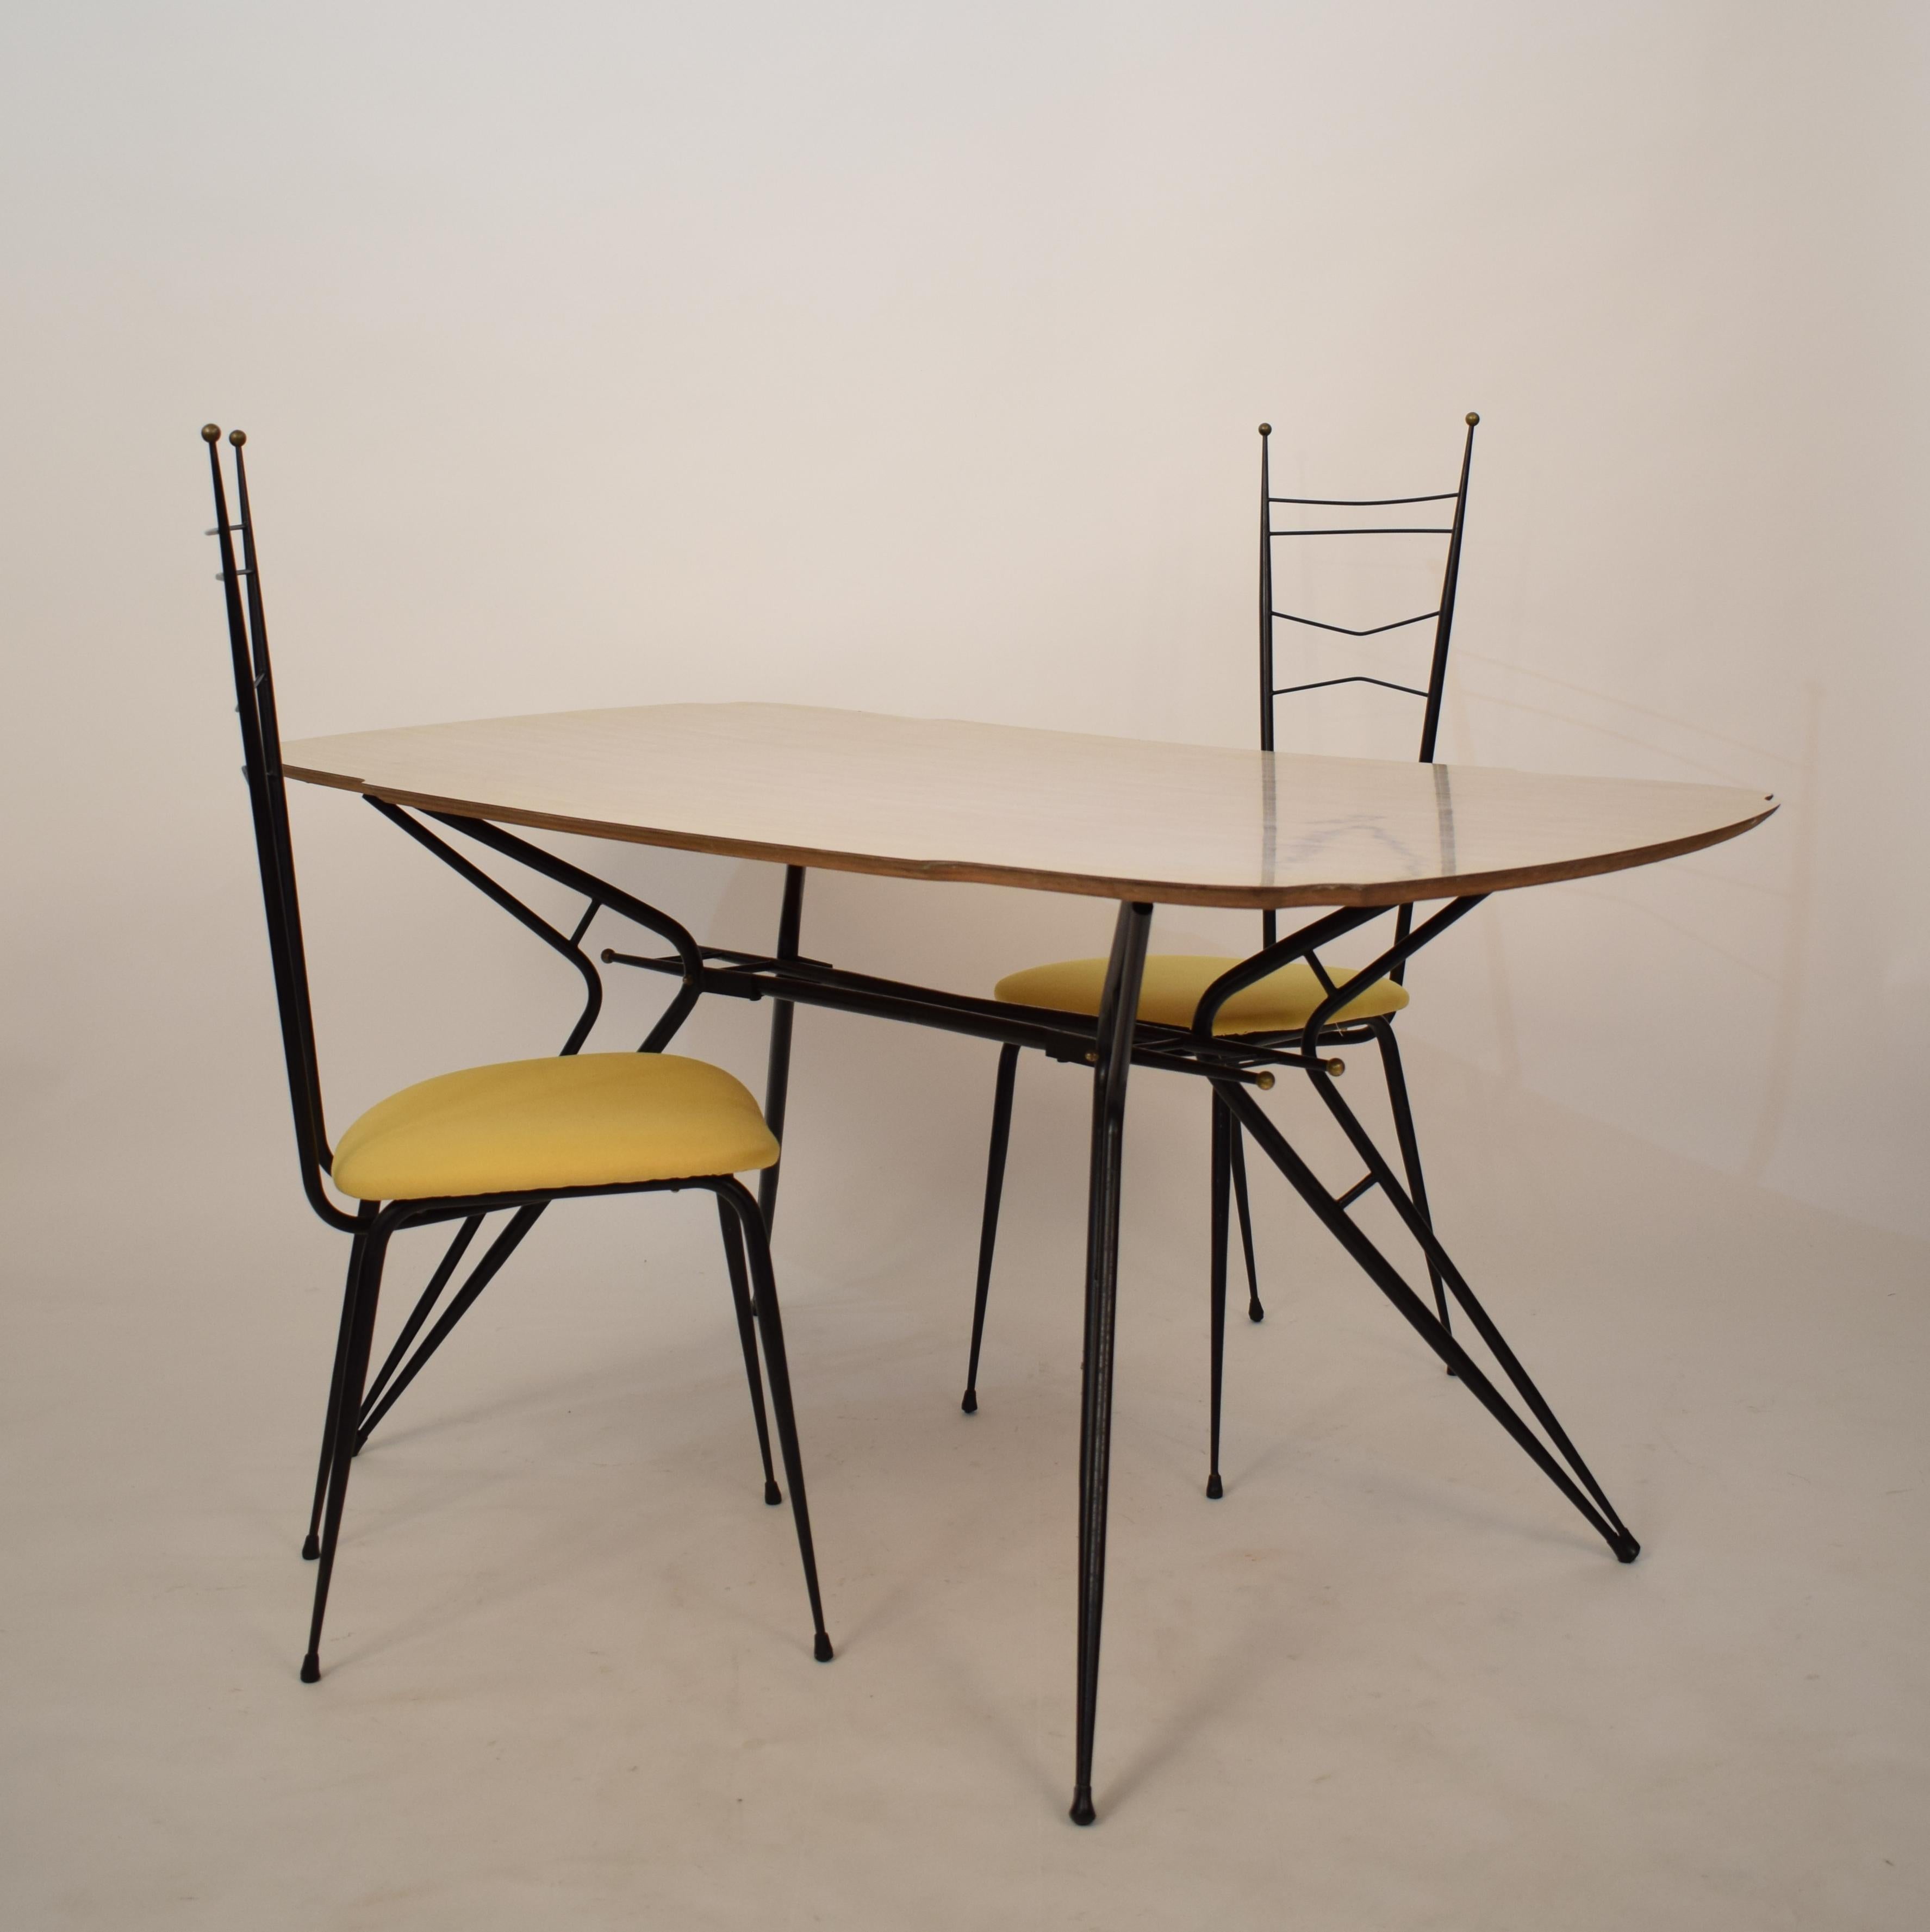 Midcentury Italian Black and White Dining Table Attributed to Ico Parisi, 1958 For Sale 2